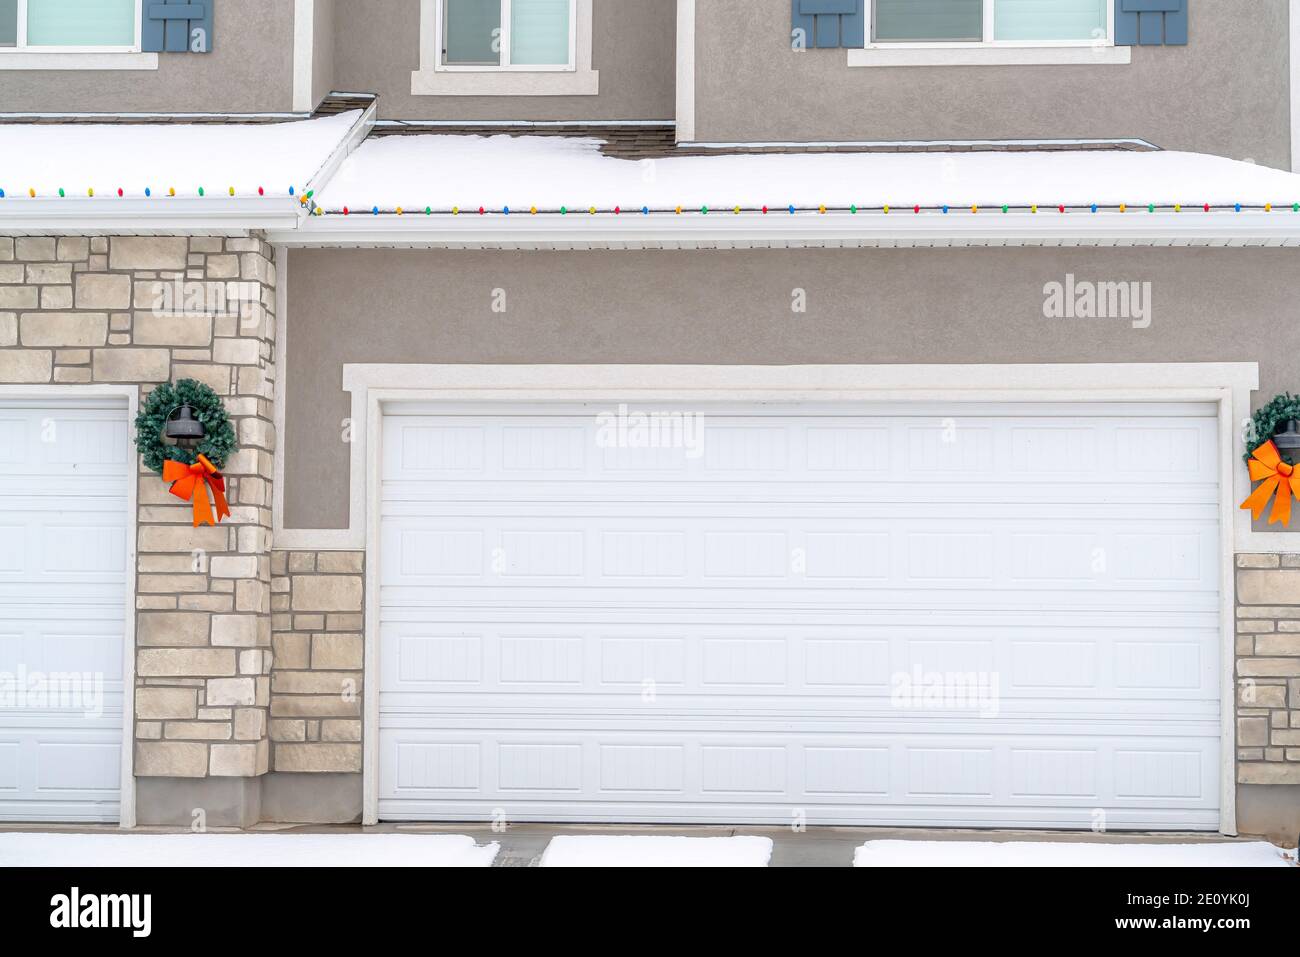 White Garage Door Of Home With Wreath And Snowy Roof Lined With Christmas Lights 2E0YK0J 